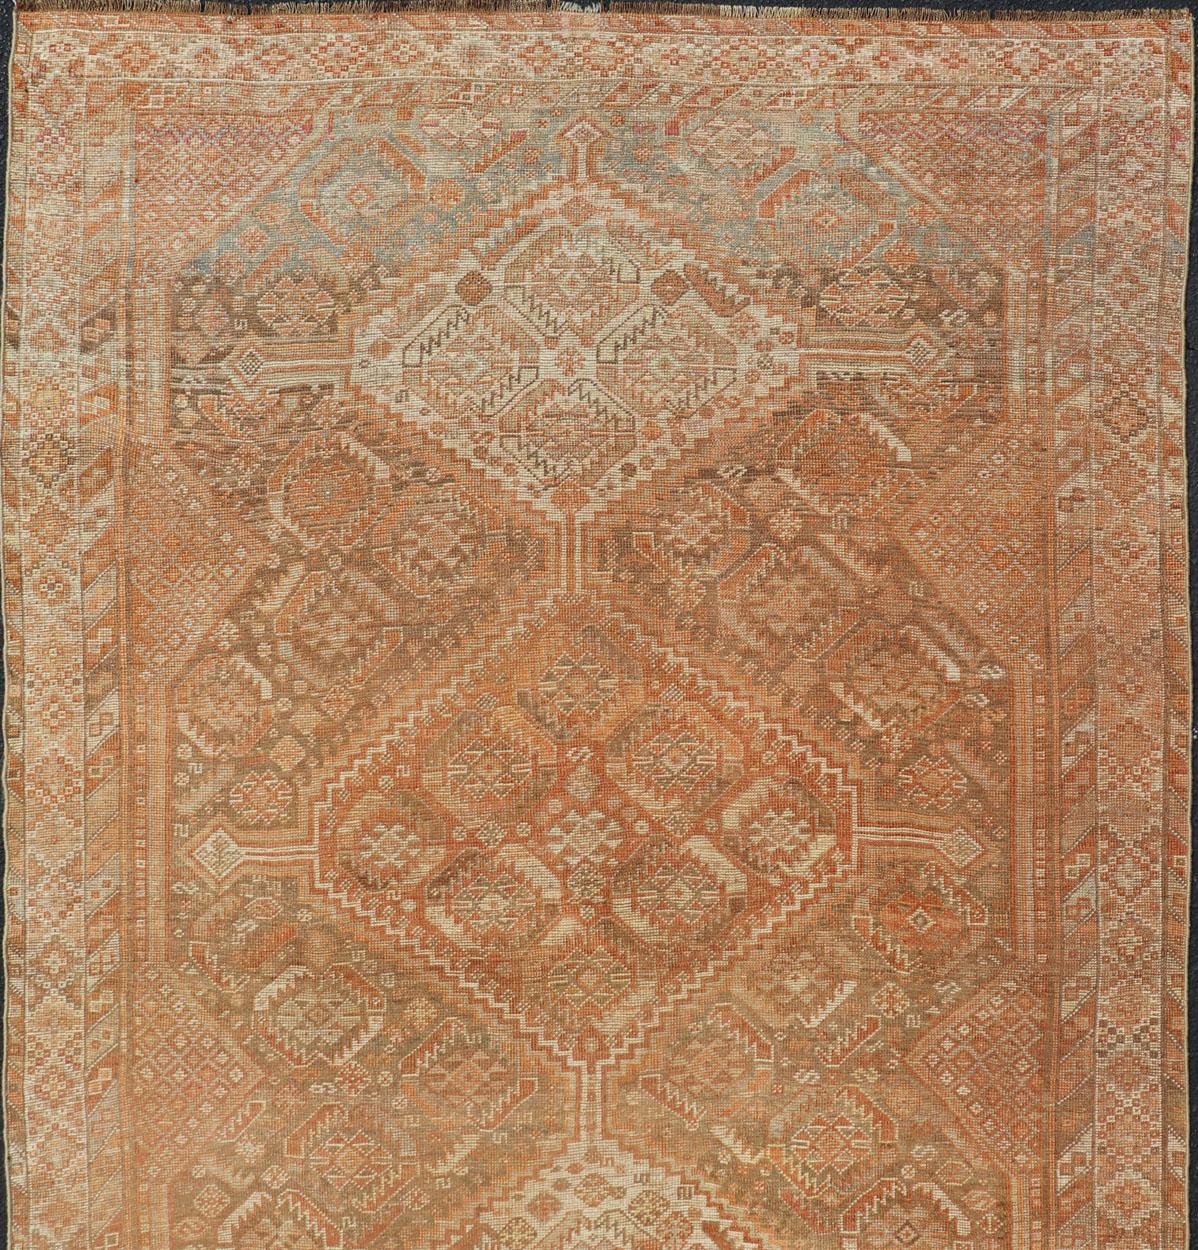 Persian antique Shiraz carpet in soft orange, light gray, light rust red and light brown with geometric medallions, rug EMB-8545-06, country of origin / type: Iran / Shiraz, circa 1920.

This antique distressed Persian Shiraz rug (circa early 20th